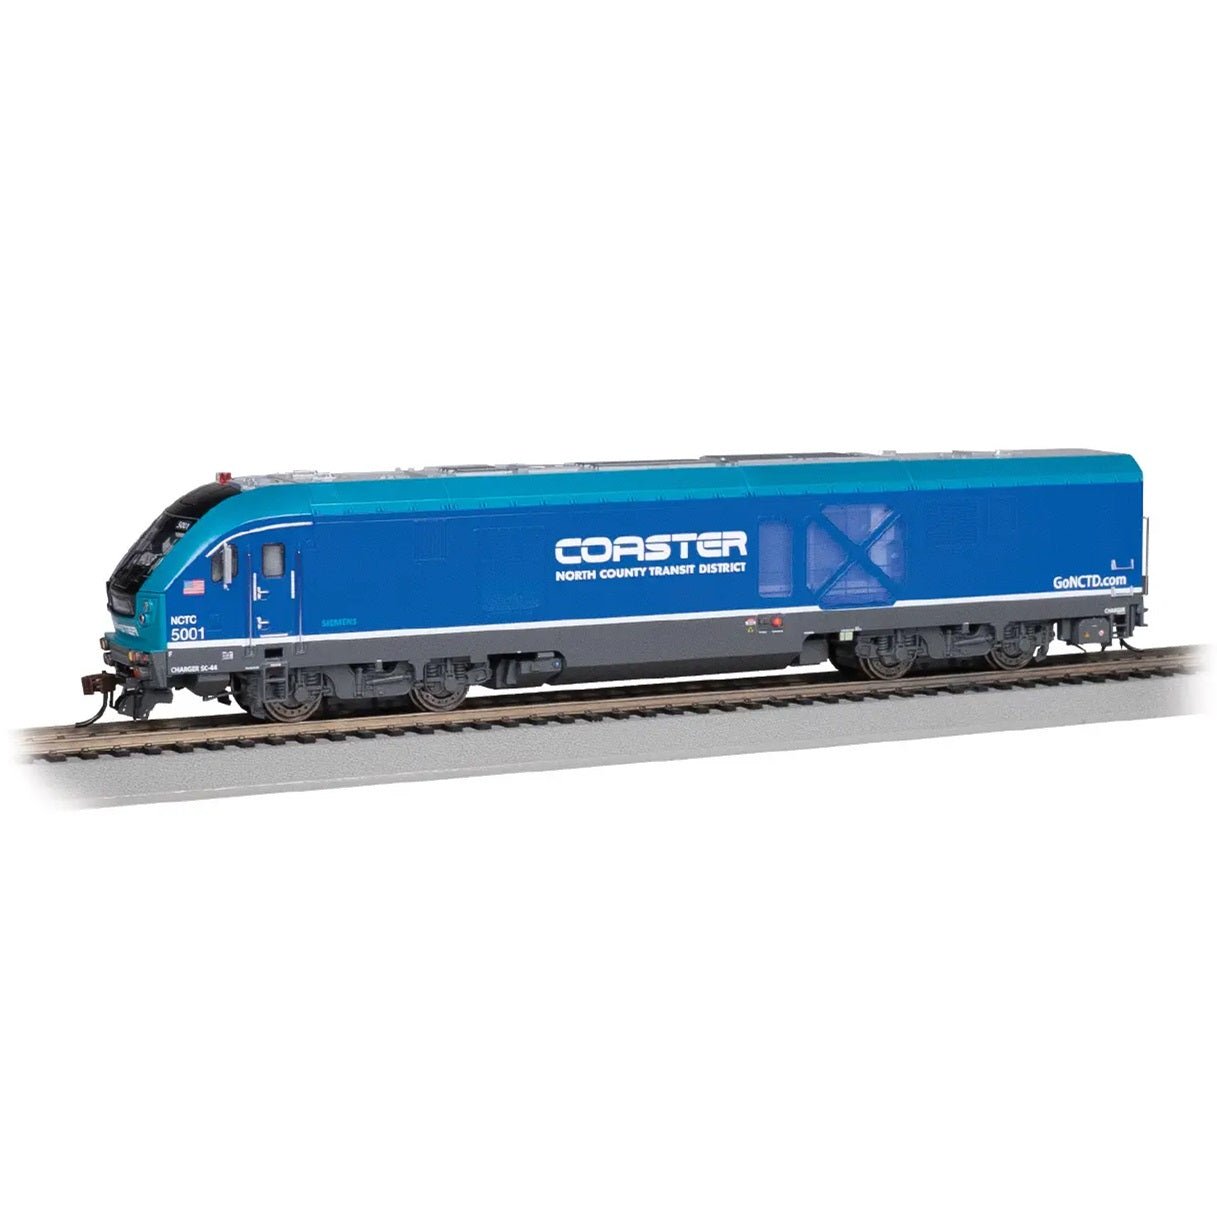 Bachmann SC - 44 Charger Diesel Electric Locomotive - North County Transit District (San Diego County) "Coaster" #5001, HO Scale - Micro - Mark Locomotives